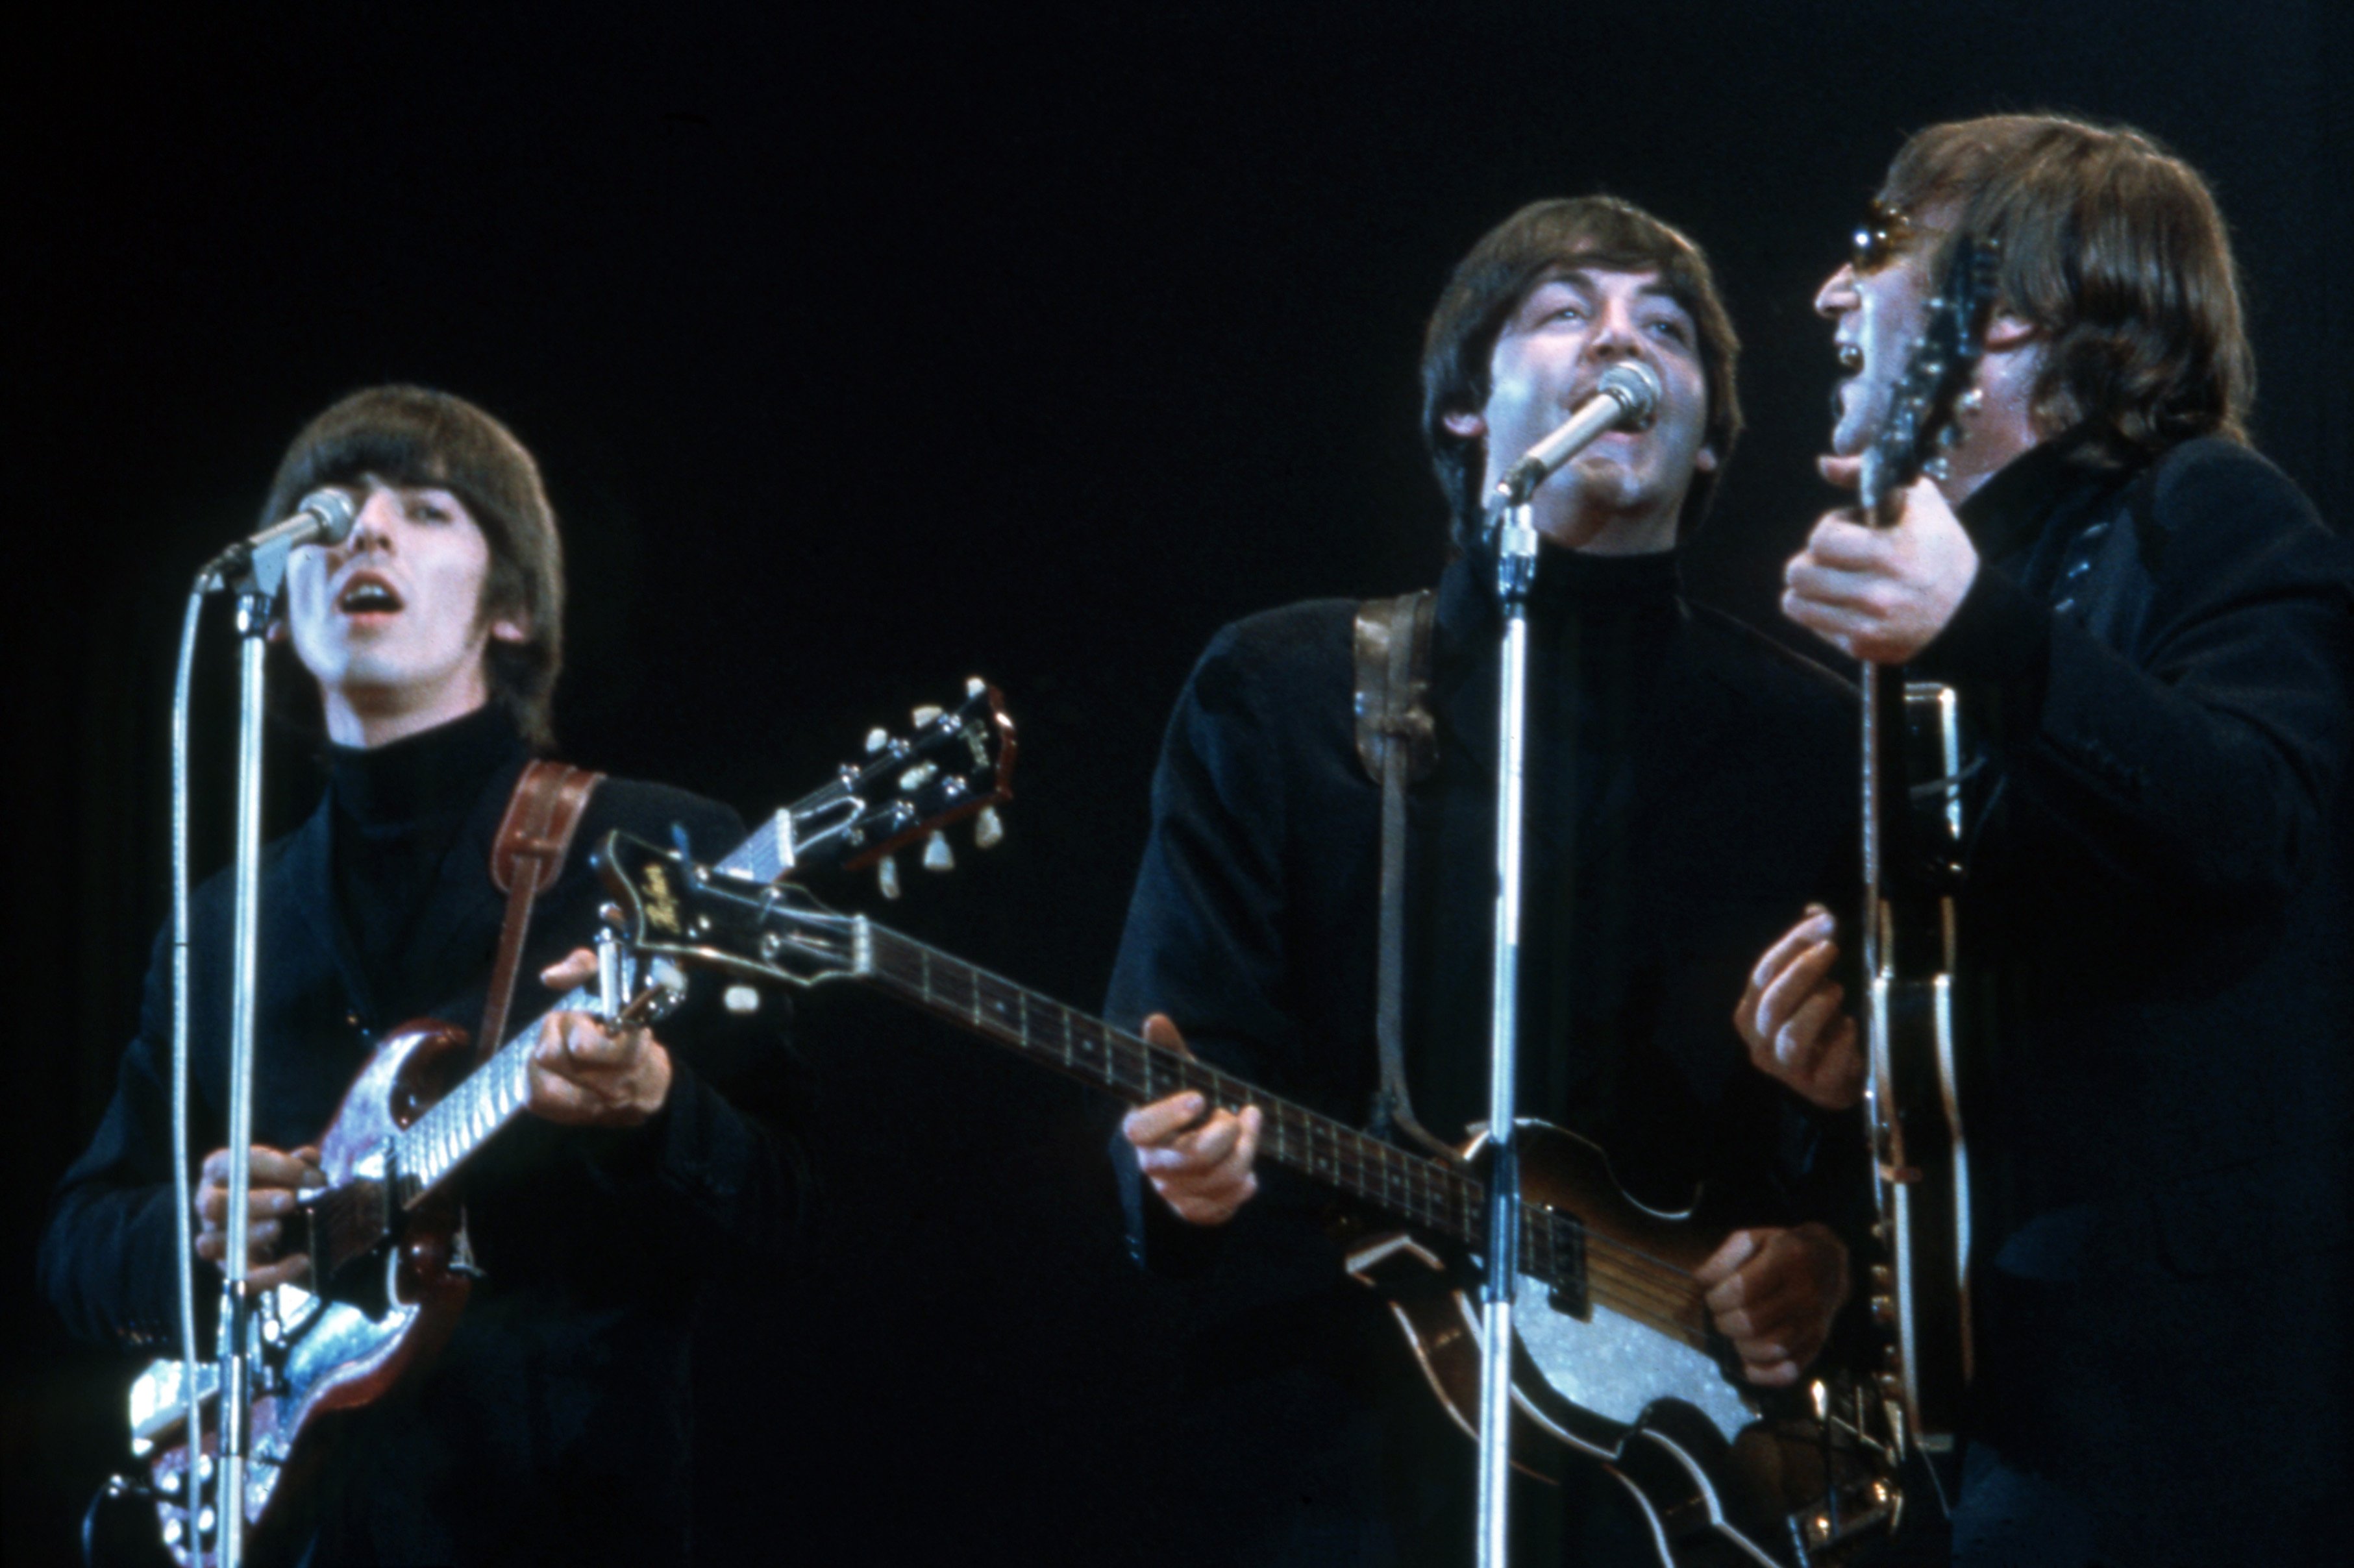 George Harrison, Paul McCartney and John Lennon of The Beatles perform at Empire Pool in Wembley